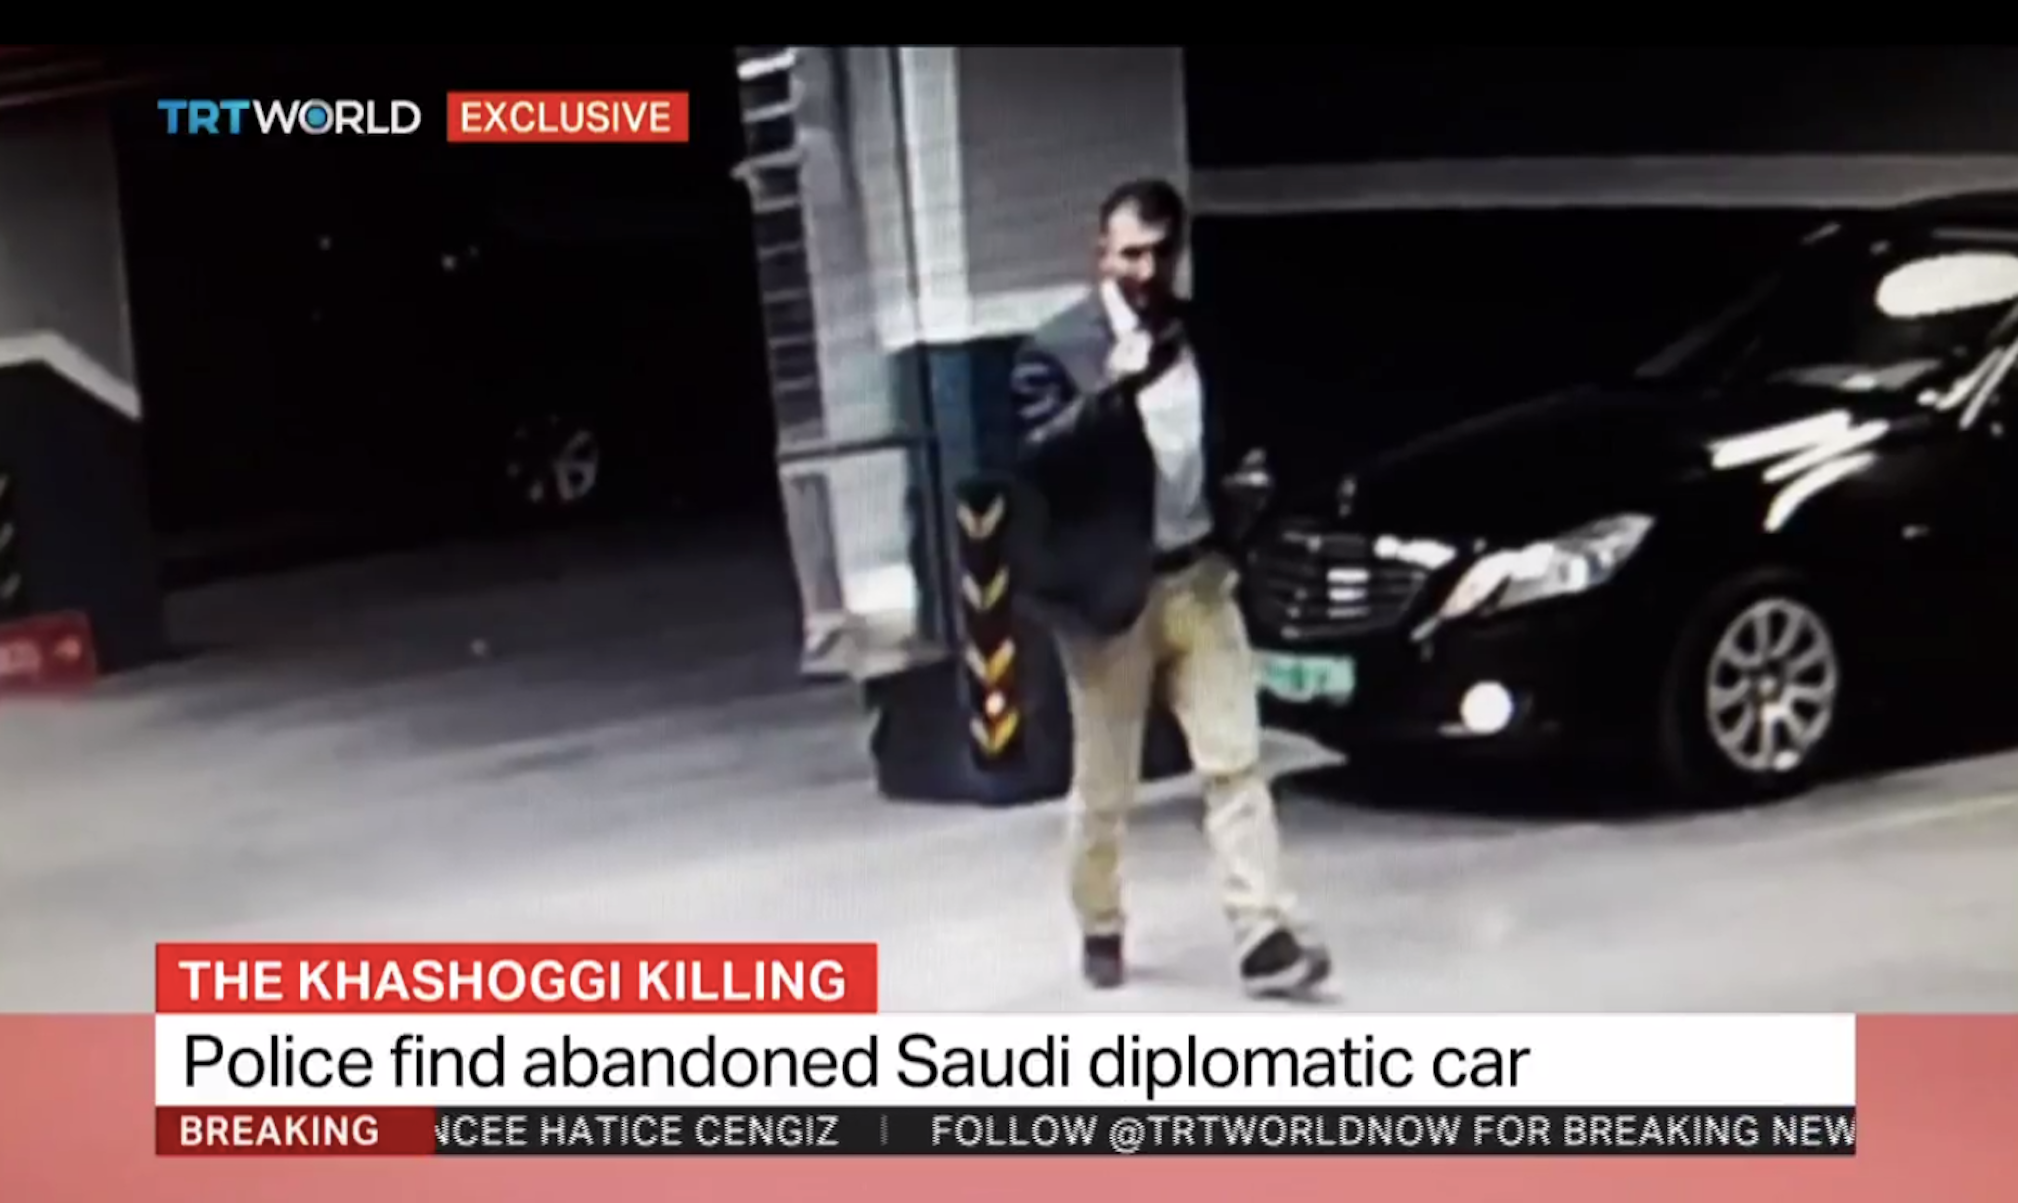 Still from Turkey's state-owned TRT shows mysterious man parking and leaving a Saudi consular vehicle in underground garage park on Istanbul's outskirts.